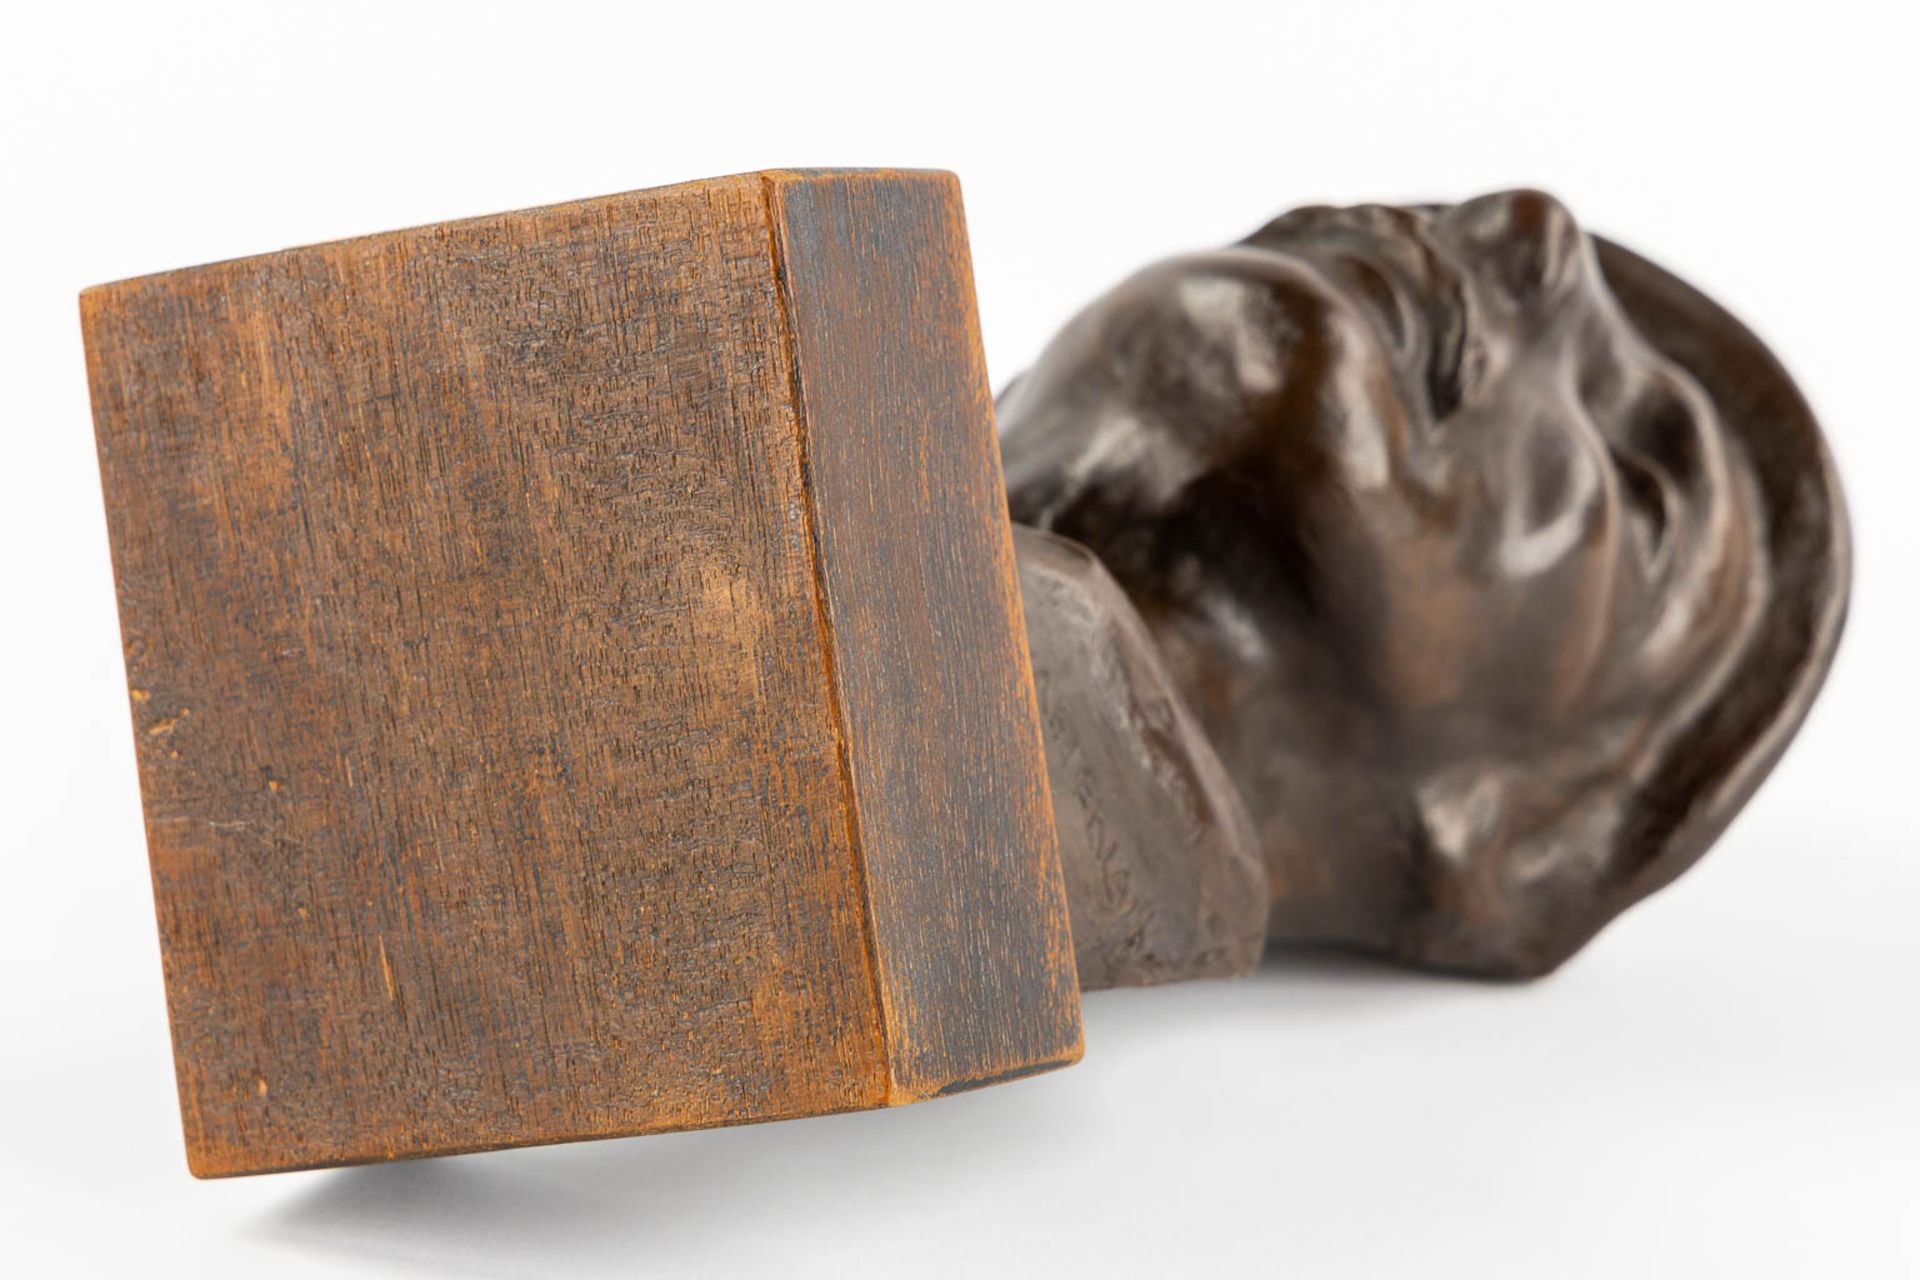 Georges WASTERLAIN (1889-1963) 'Mineur' patinated bronze. (L:11 x W:13 x H:26,5 cm) - Image 7 of 11